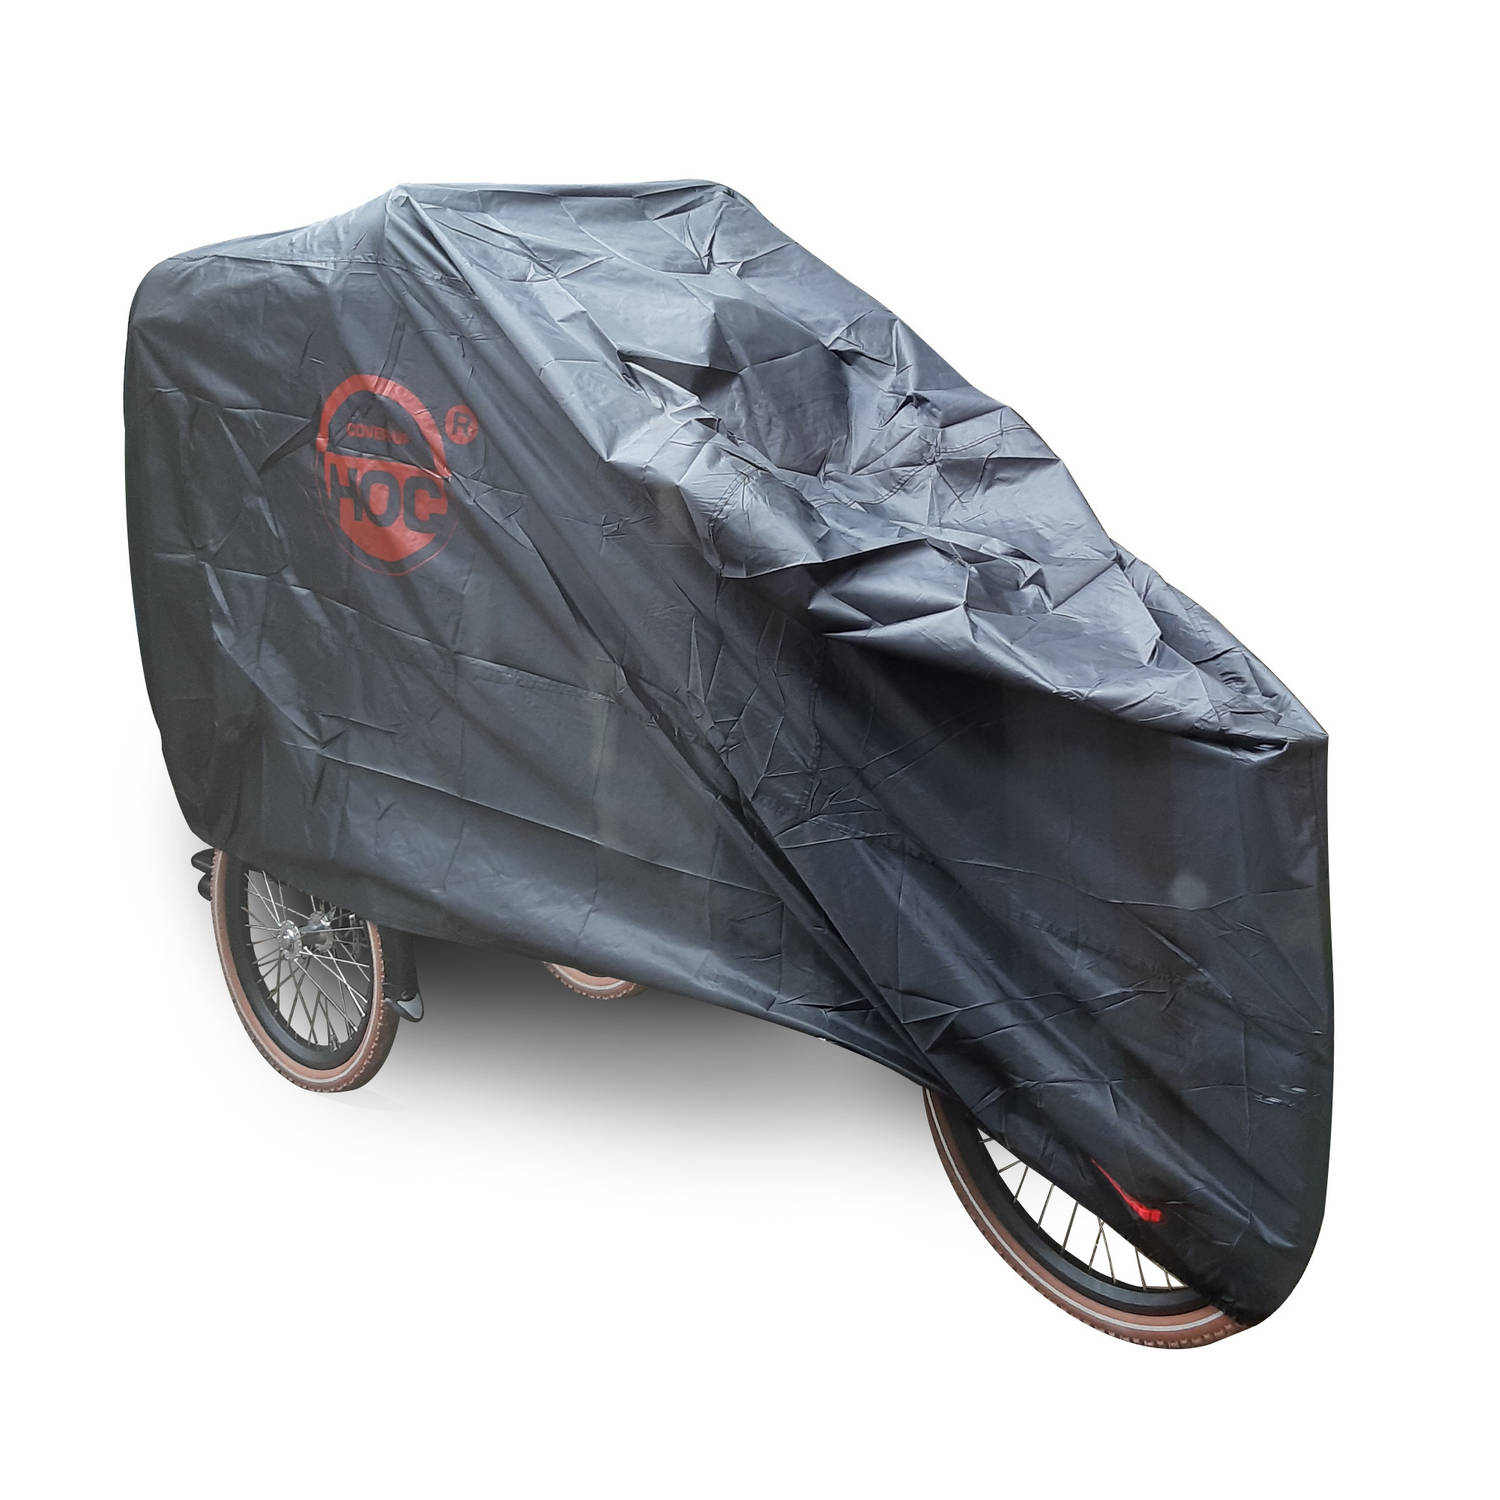 CUHOC Bakfietshoes Voor E-dolly Maxdrive - Redlabel - Bakfiets Hoes - Zwart